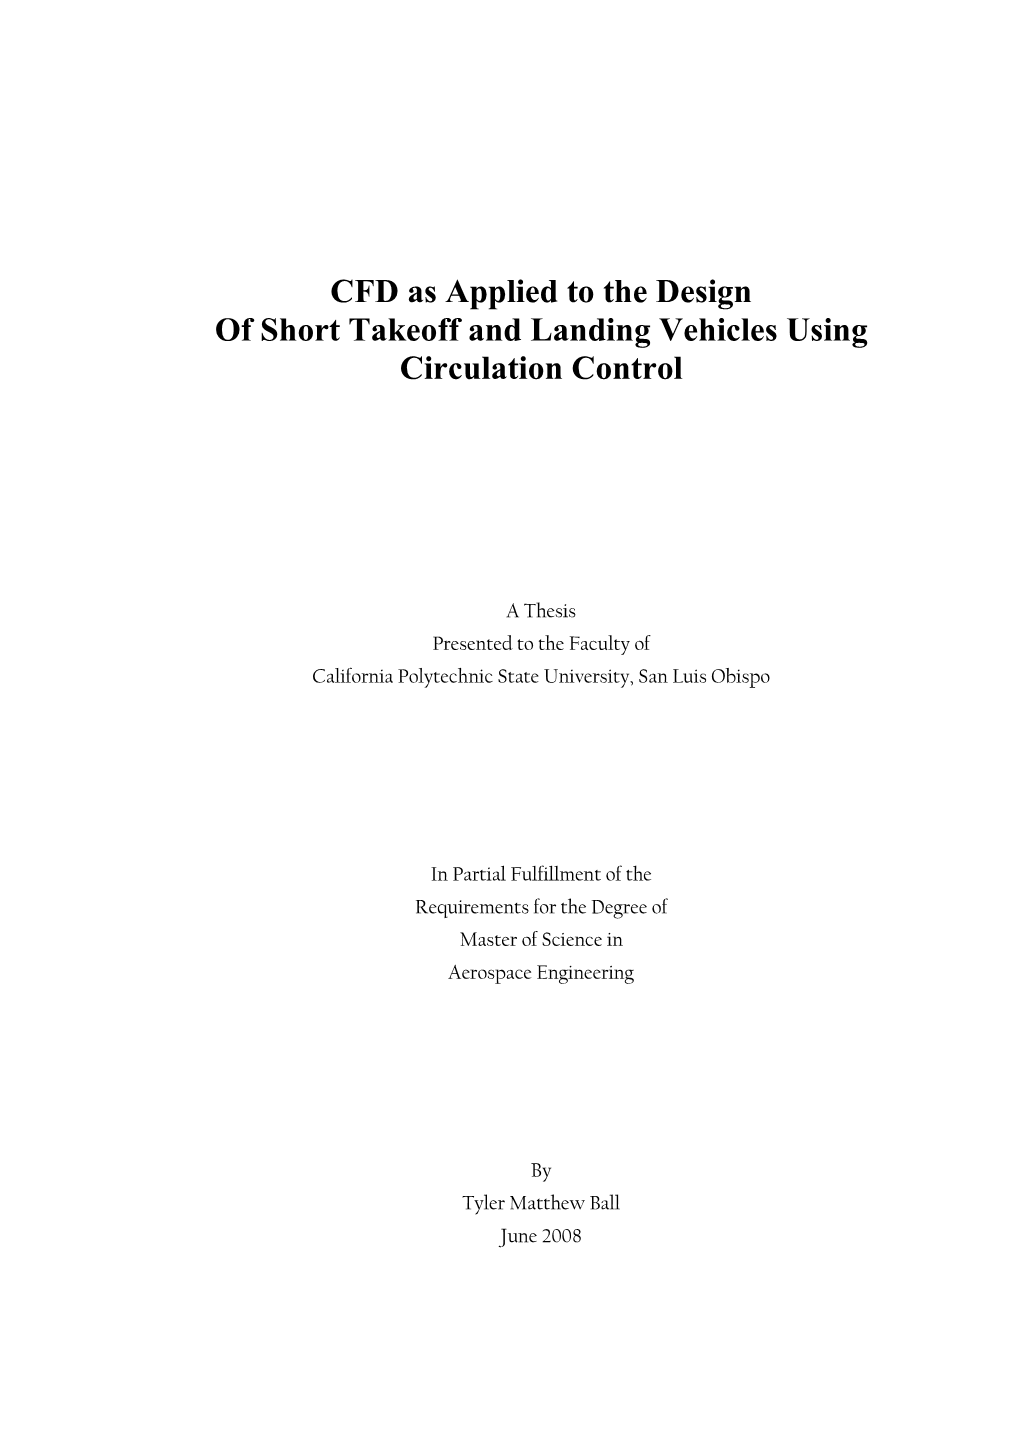 CFD As Applied to the Design of Short Takeoff and Landing Vehicles Using Circulation Control